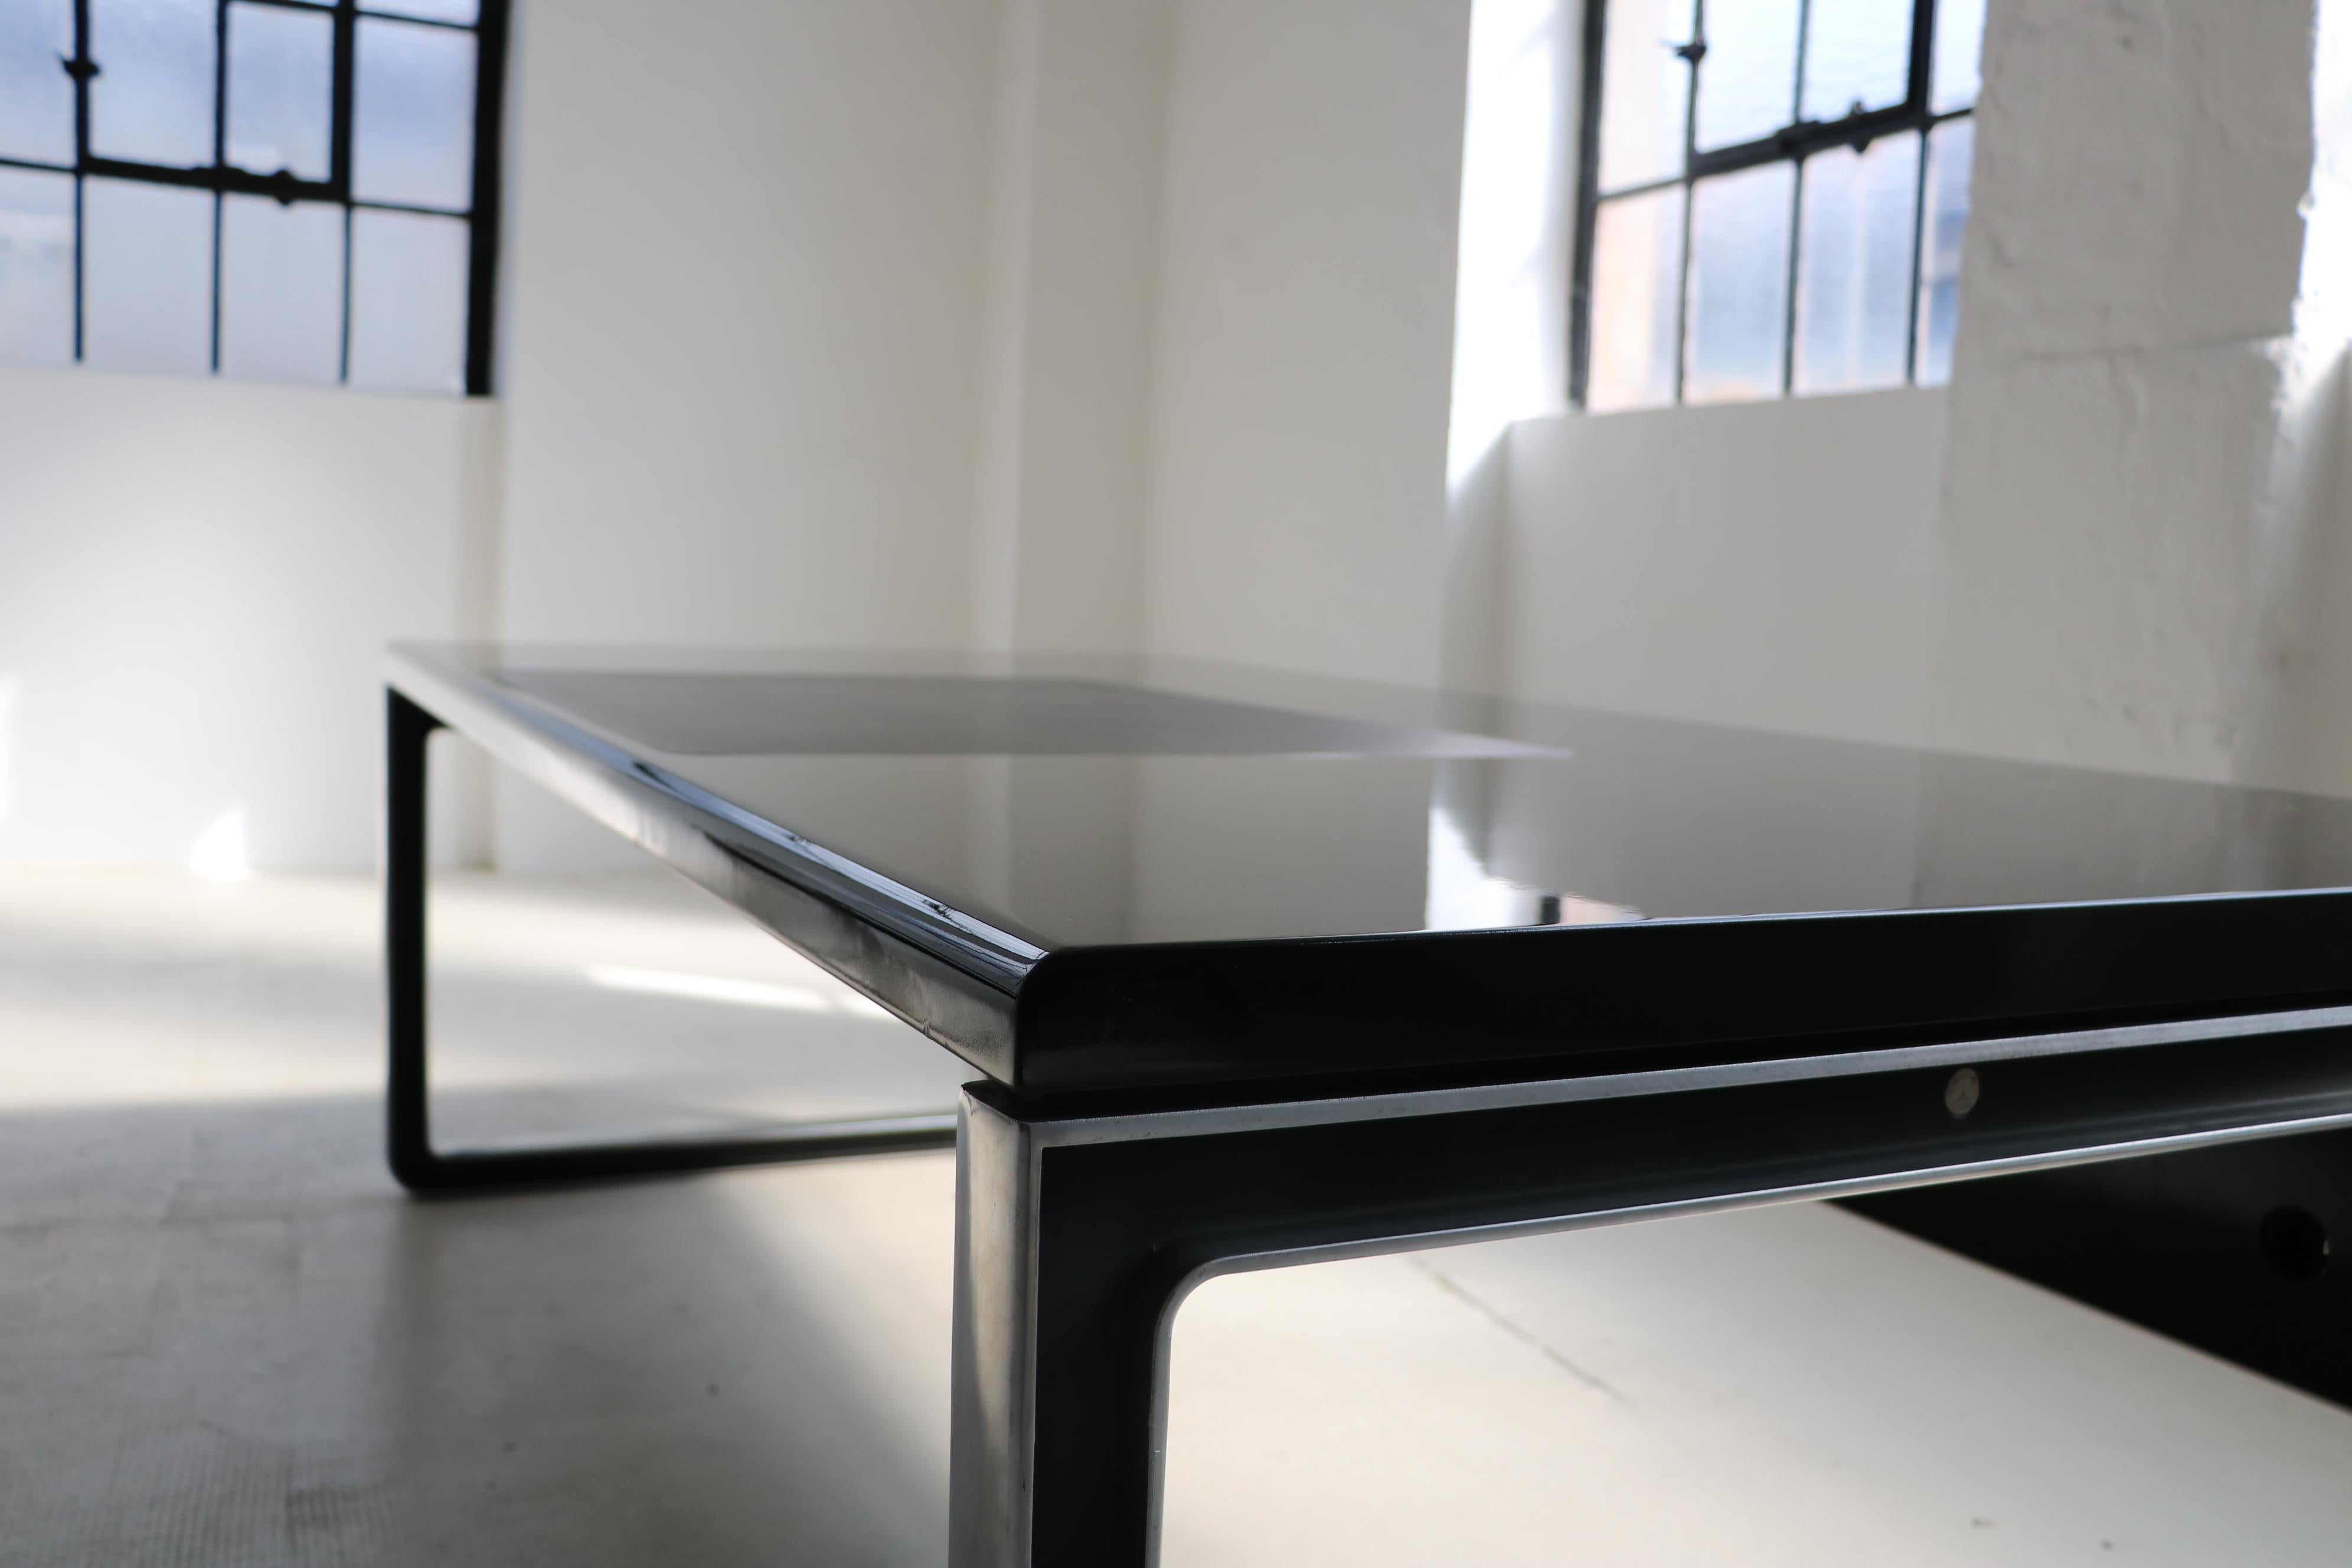 Osvaldo Borsani & Eugenio Gerli desk with leather inlay T333 Tecno 
Frame outside aluminium polished/inside aluminium lacquered black, top wood piano lacquer black with leather inlay black, model T333.

Price applies only to the described